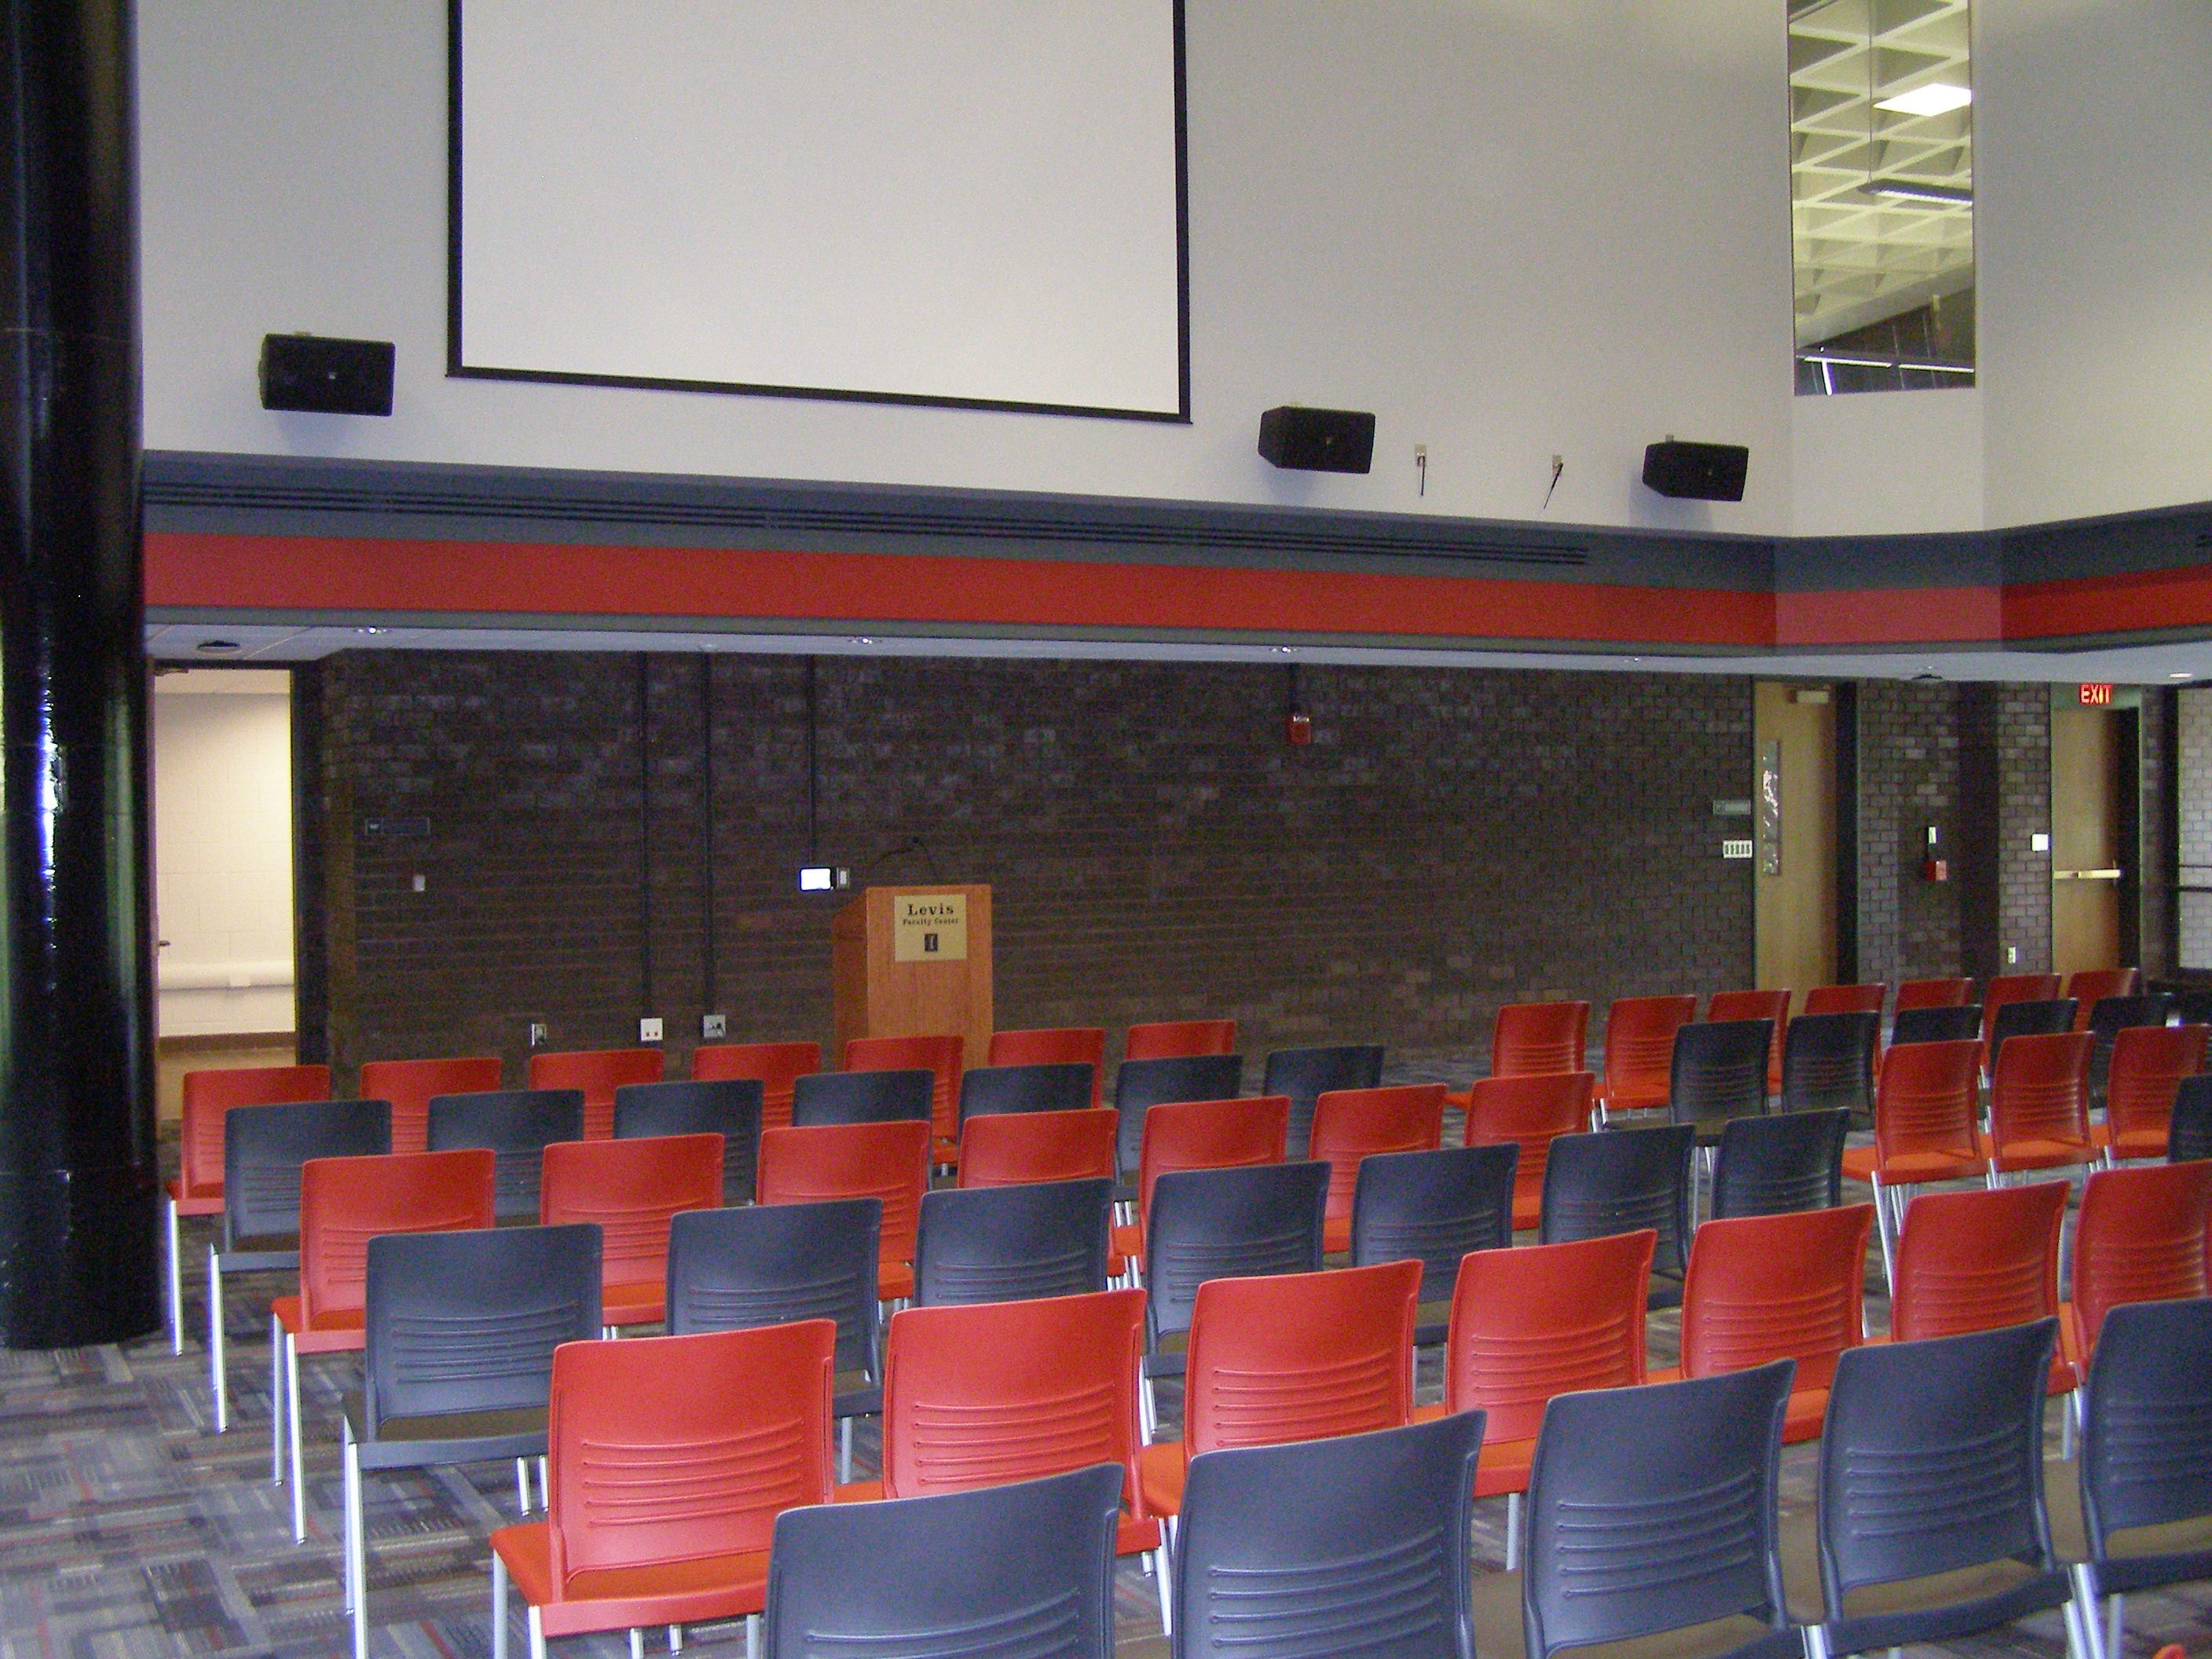 This is a vew of the room, with moveable chairs, and lectern in front.